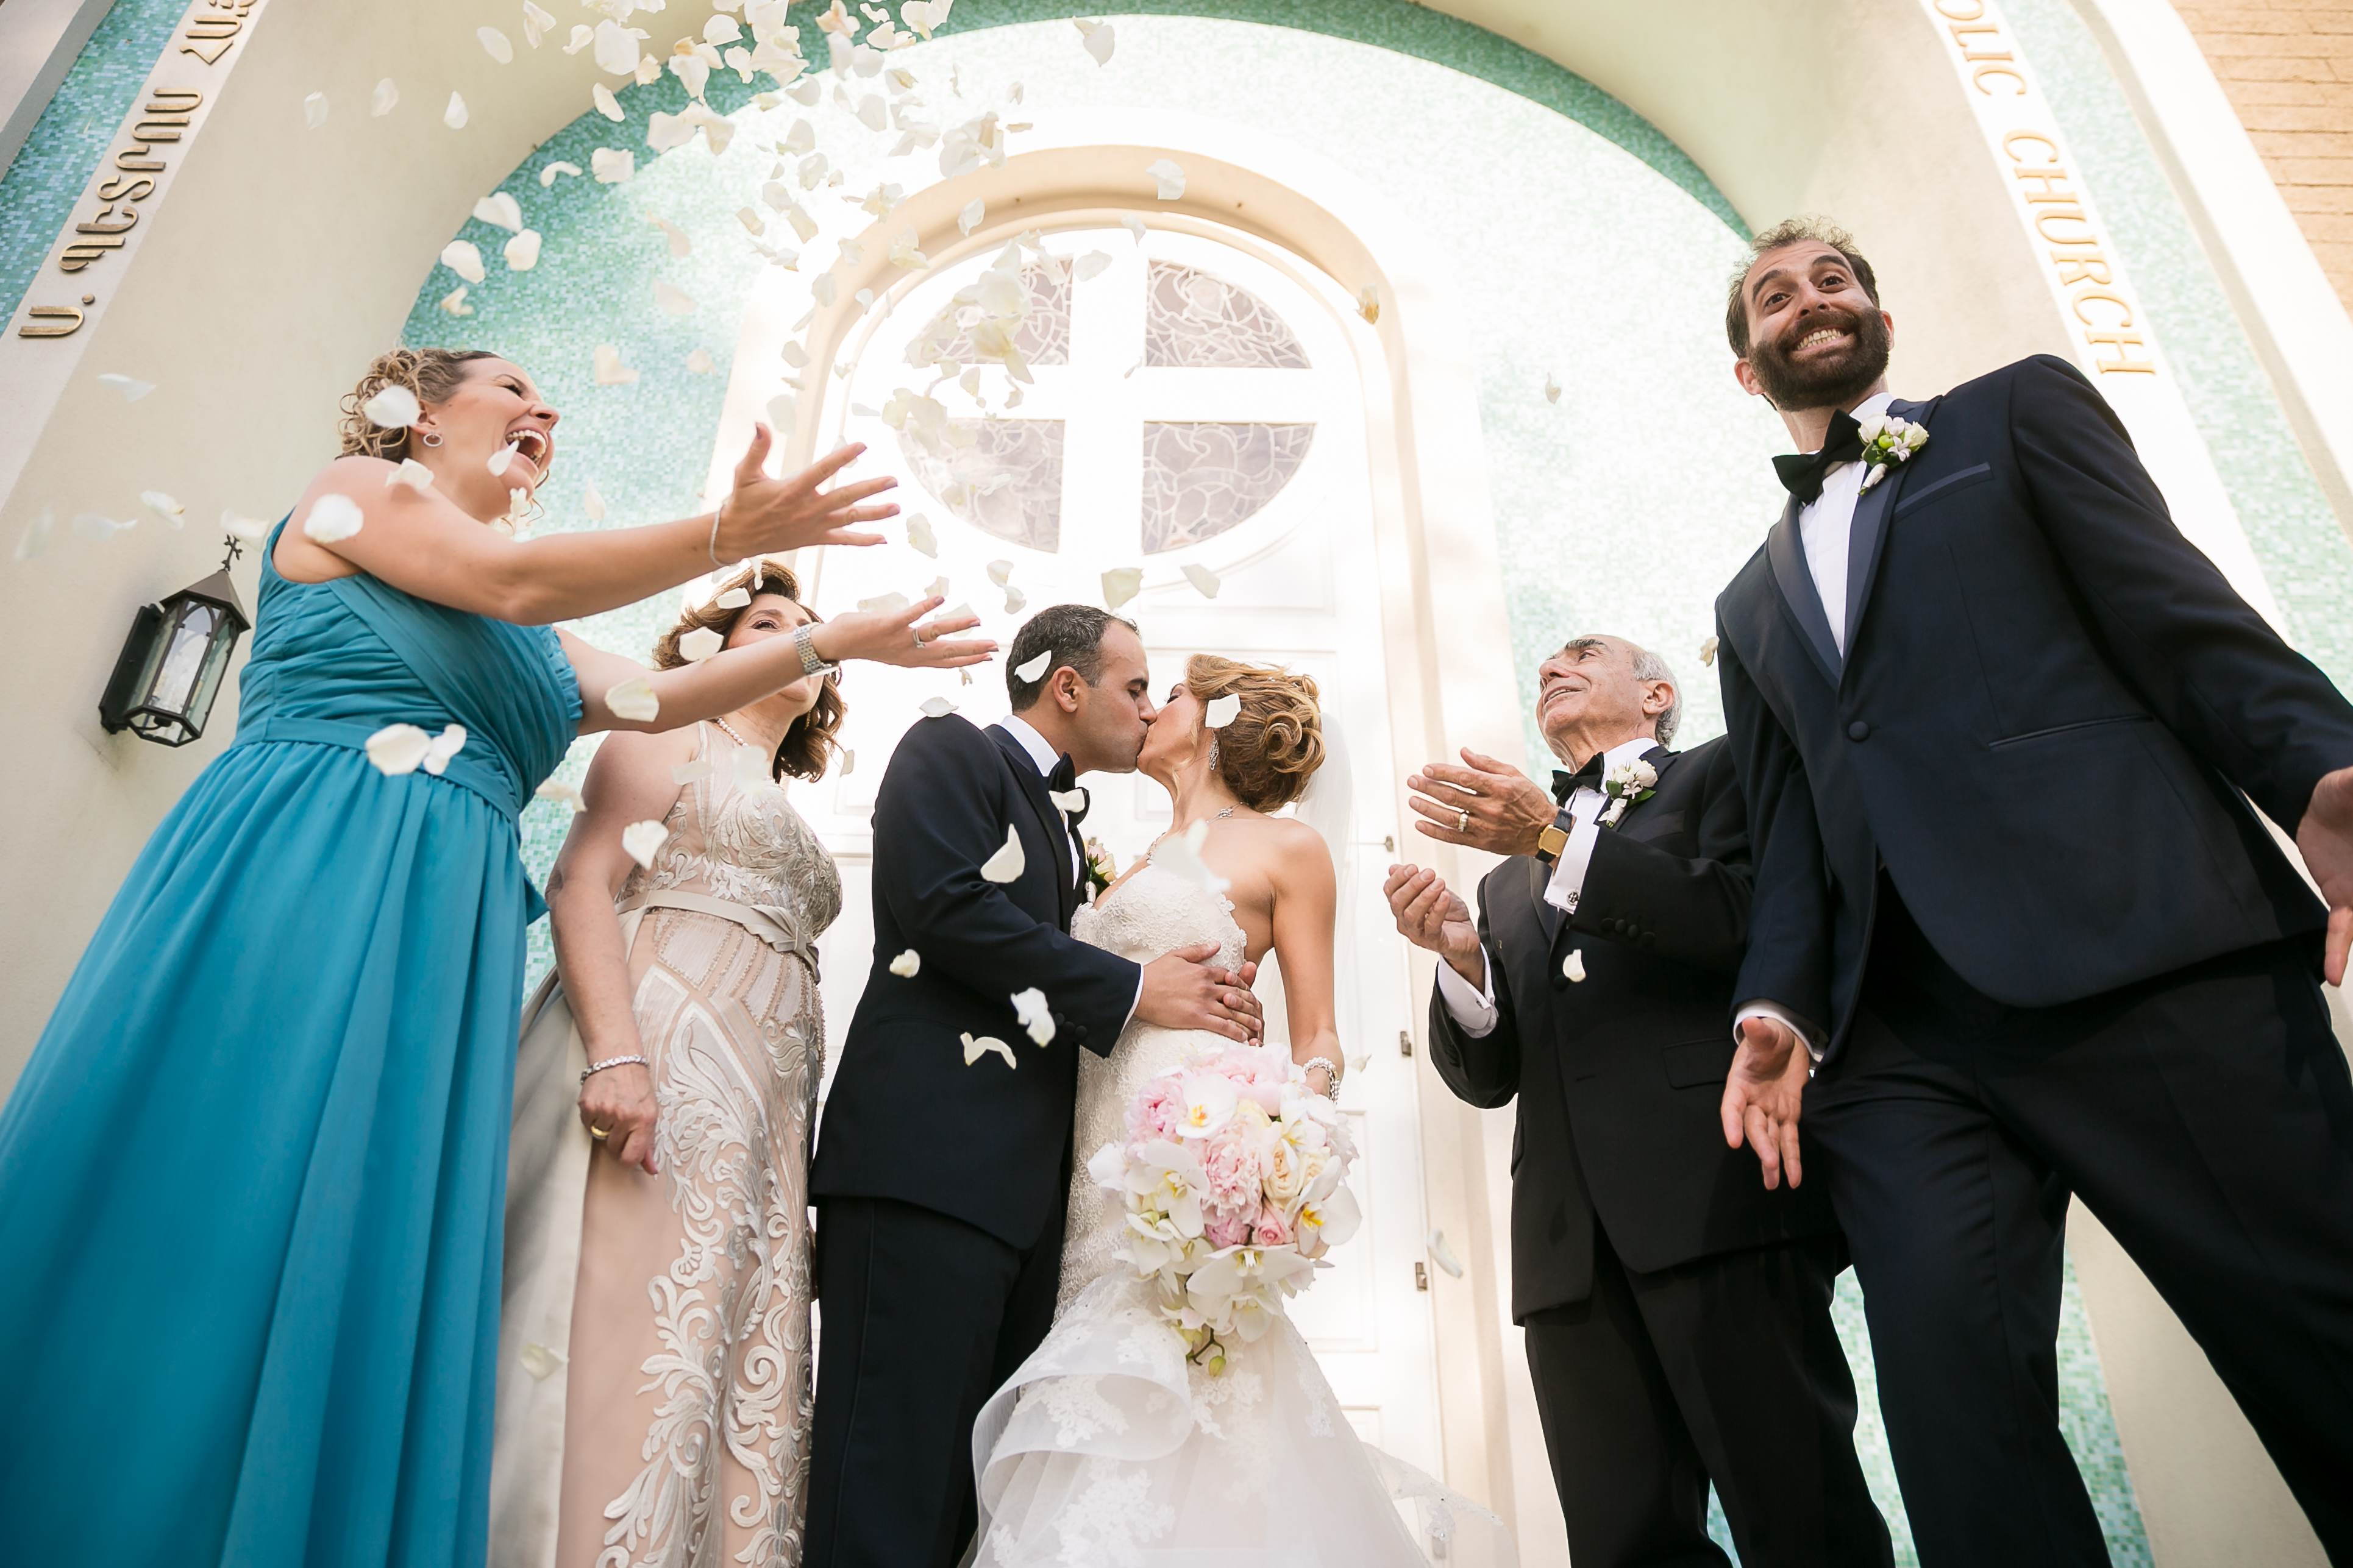 Throwing flower petals in the air while the bride and groom kiss during their wedding